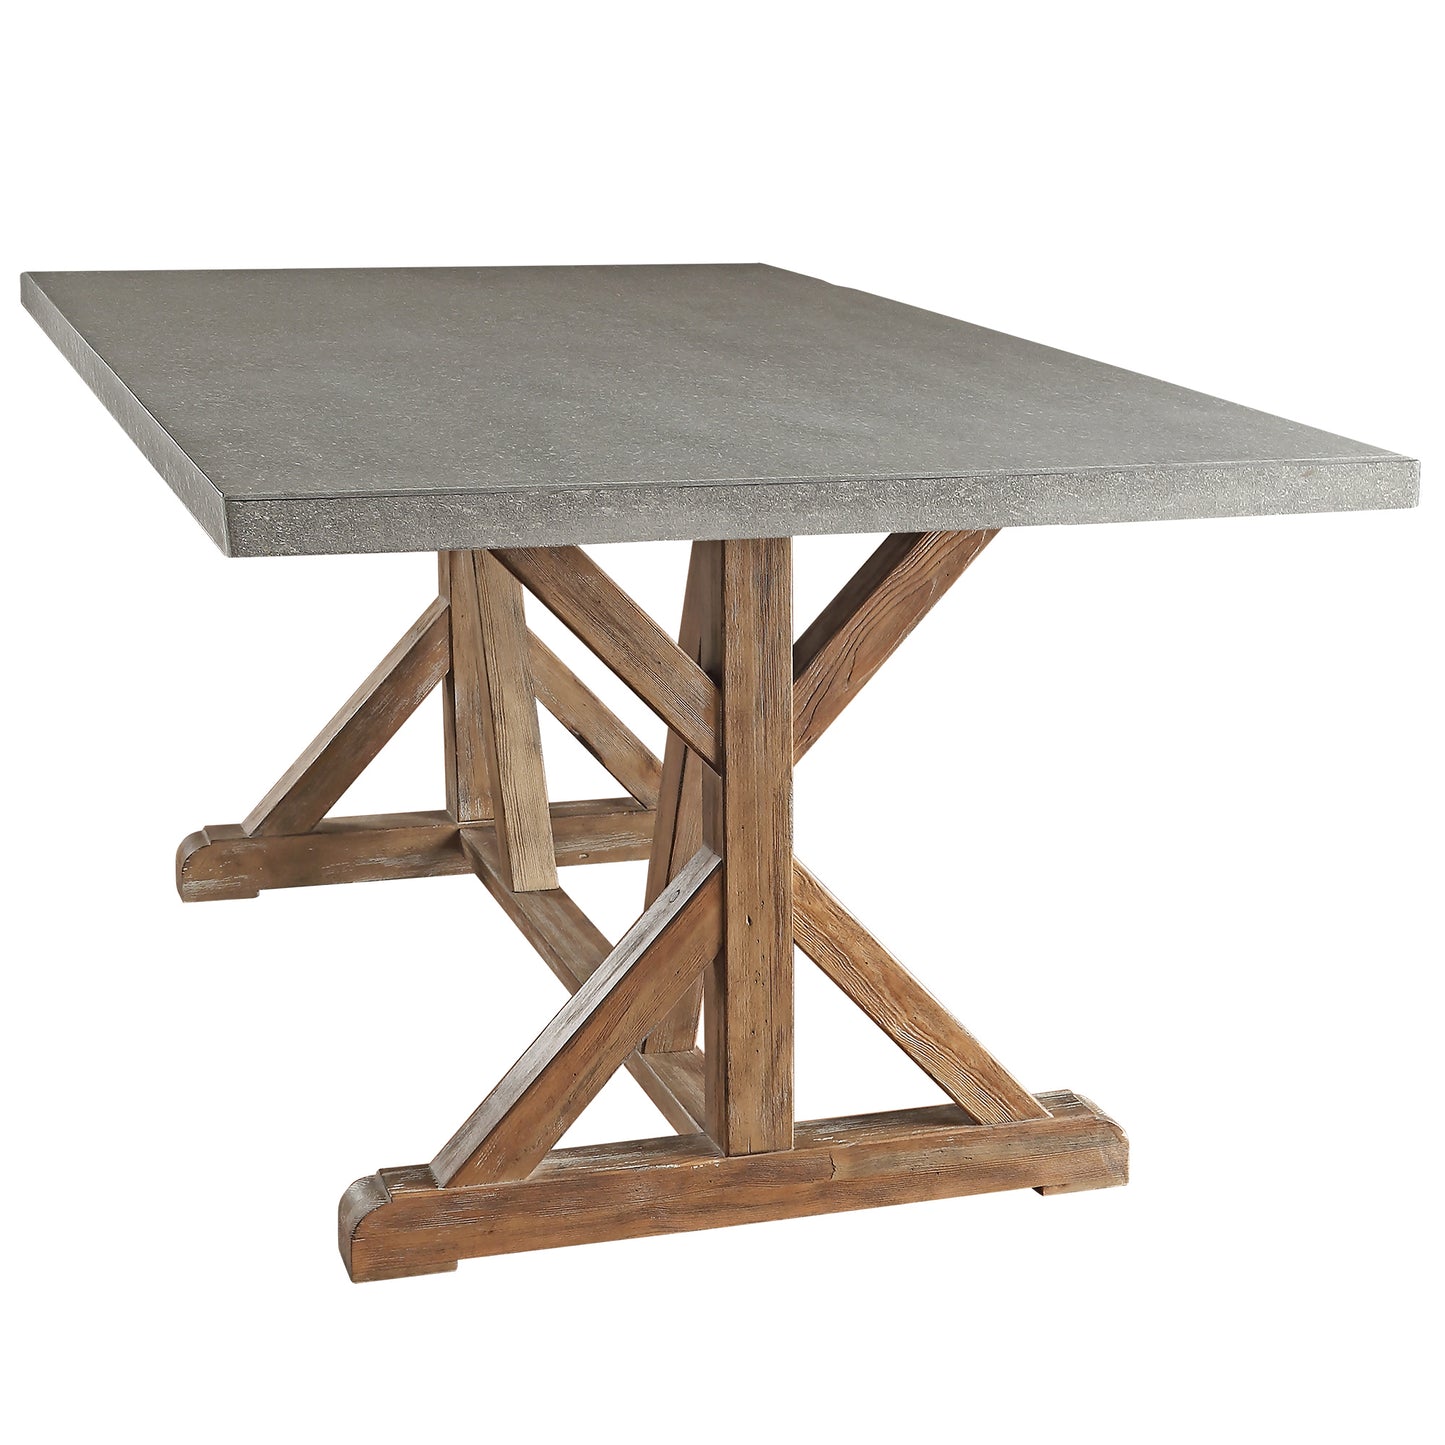 Rustic Pine Concrete Table Top Dining Table - Concrete-Inlaid